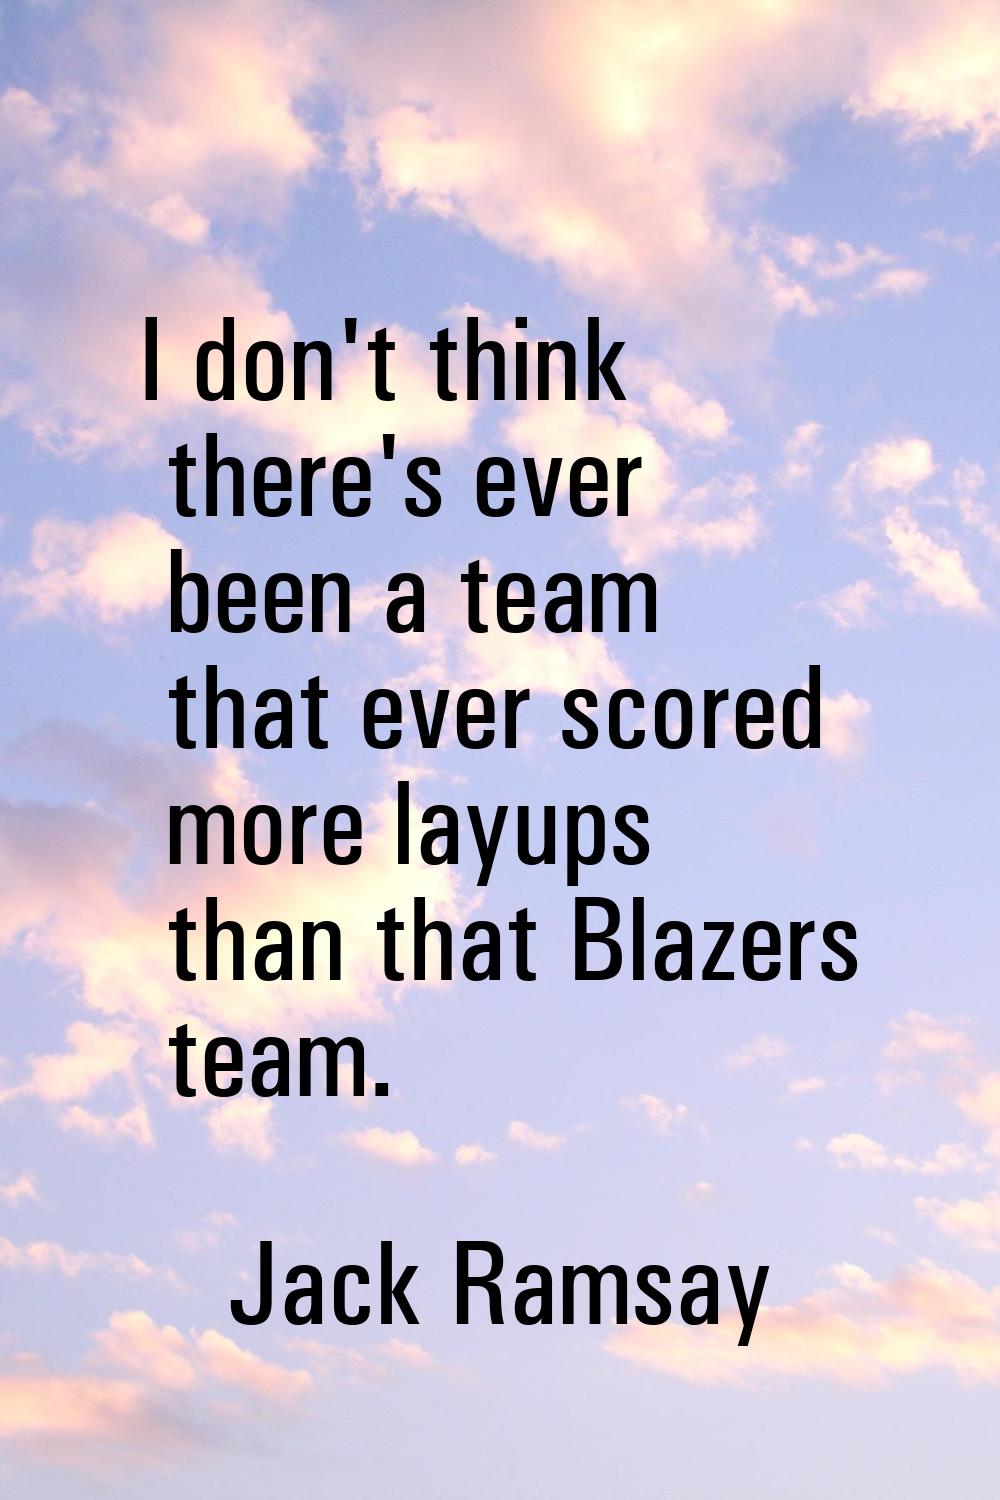 I don't think there's ever been a team that ever scored more layups than that Blazers team.